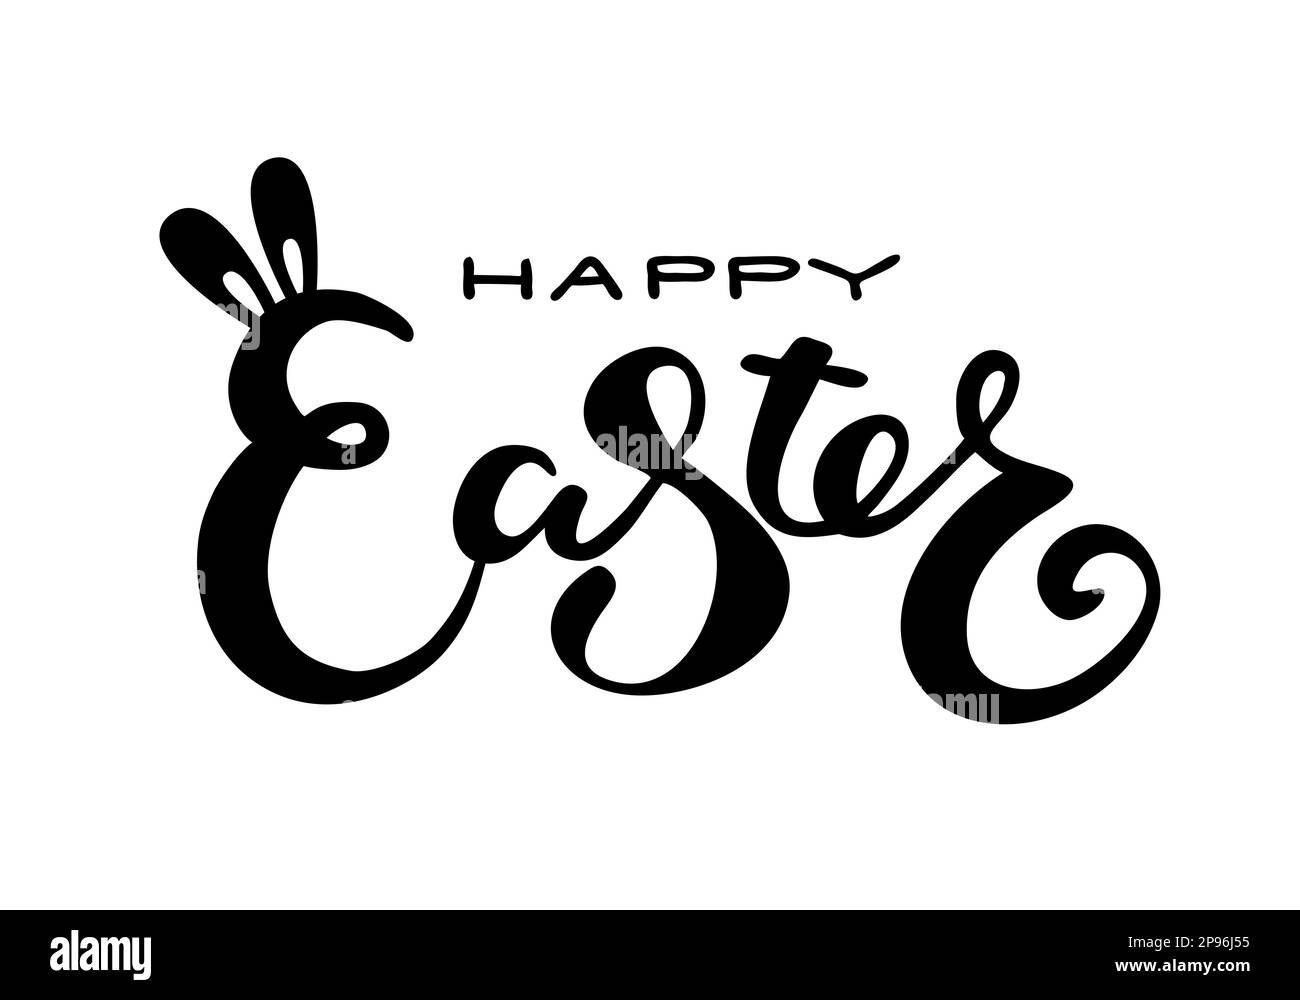 Cute Happy Easter lettering quote with bunny ears Stock Vector